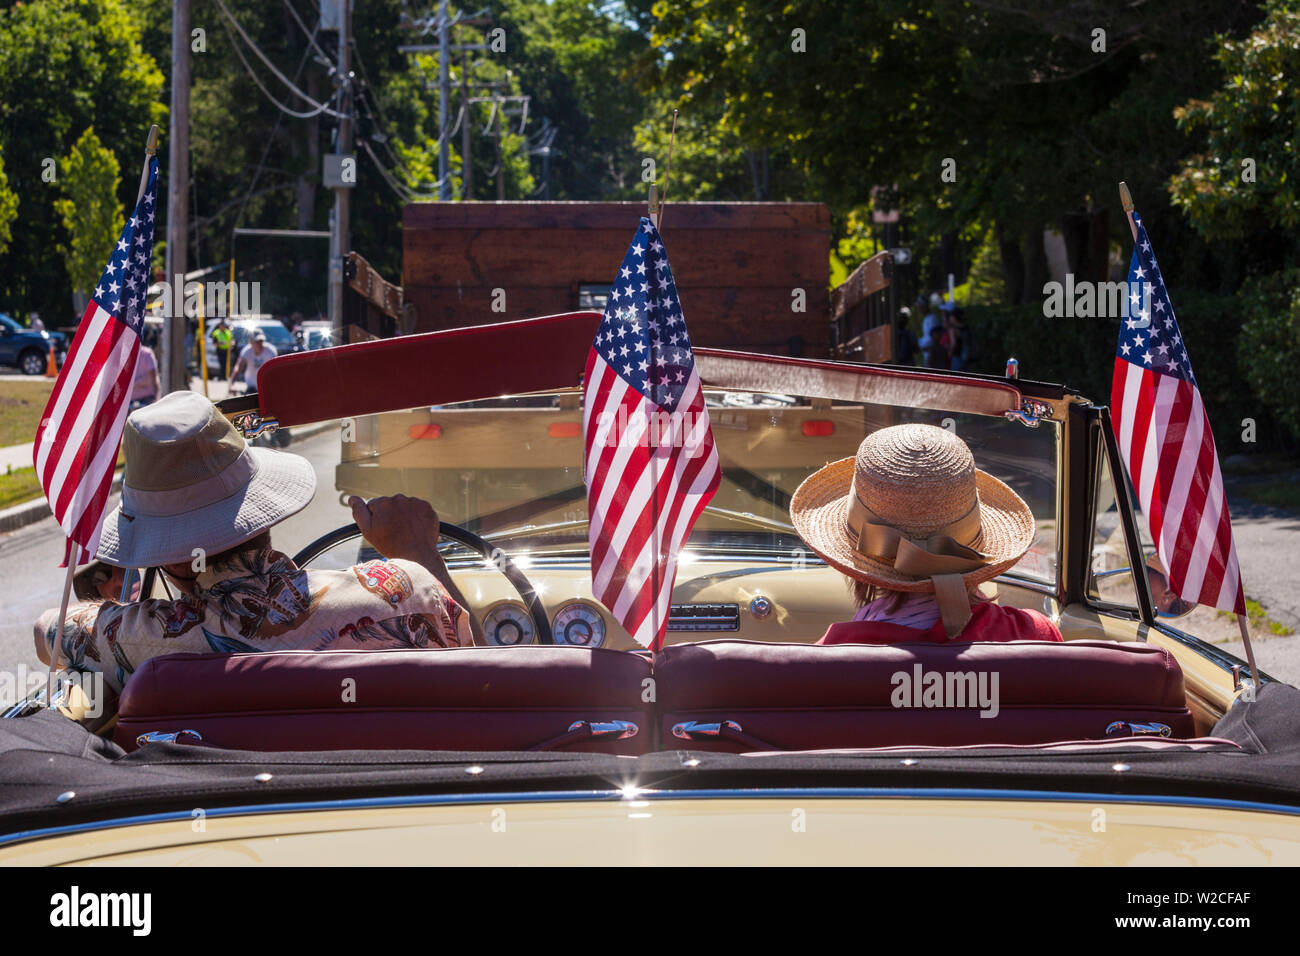 USA, Massachusetts, Manchester By The Sea, Fourth of July, parade of antique cars Stock Photo